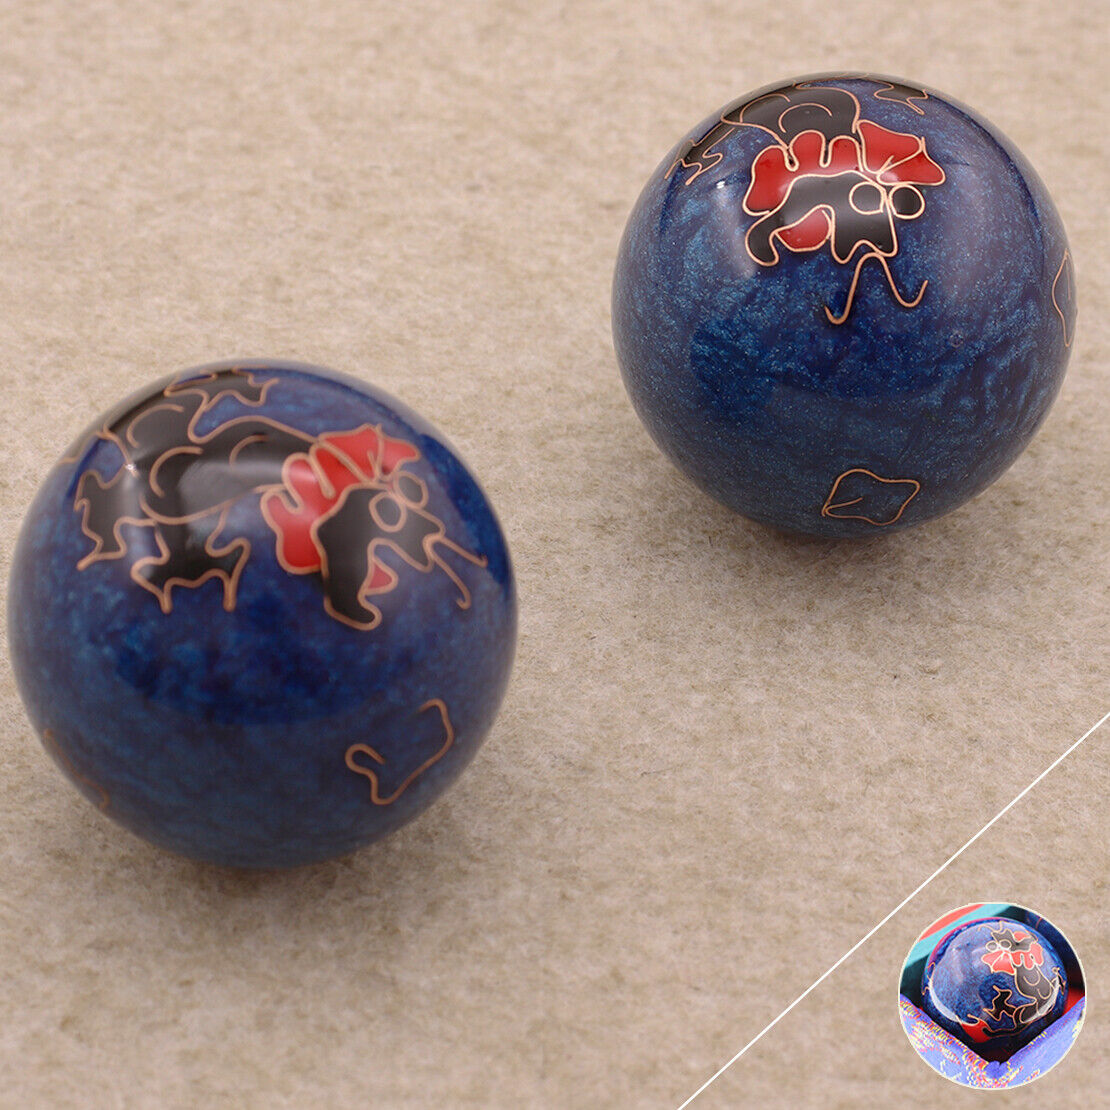 2x 40mm Dragon Phoenix Baoding Balls Health Exercise Stress Relaxation Therapy